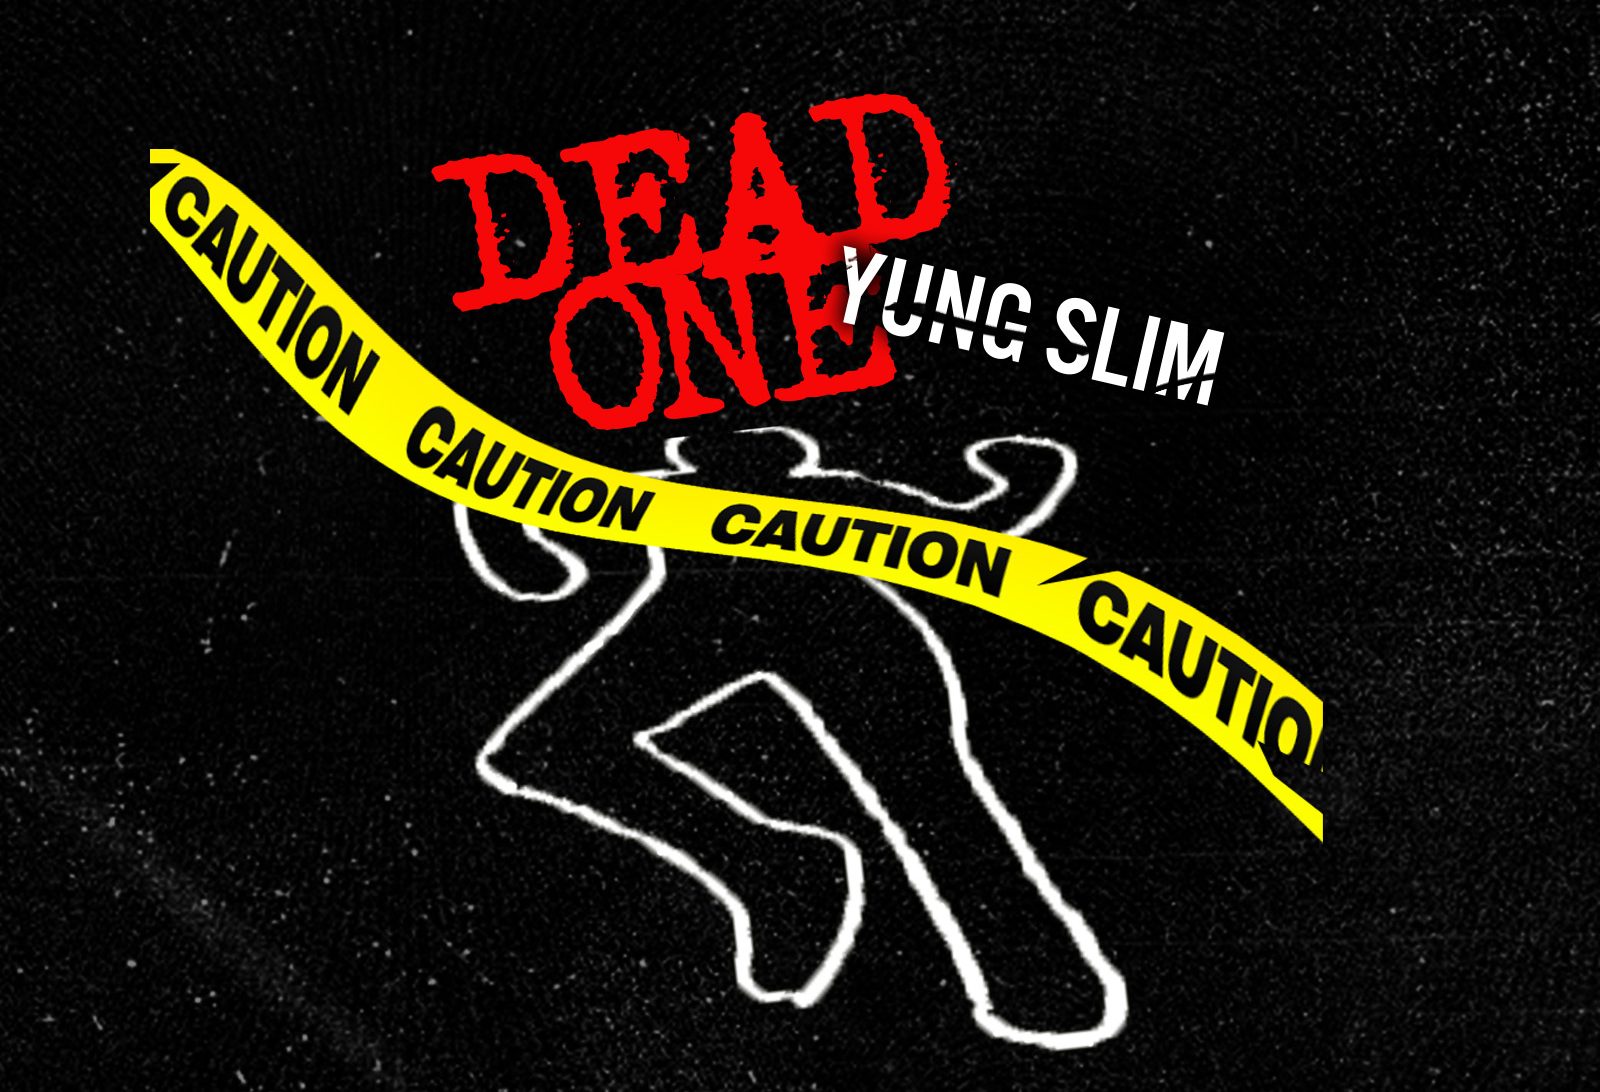 'Dead One' by Yung Slim is OUT NOW!